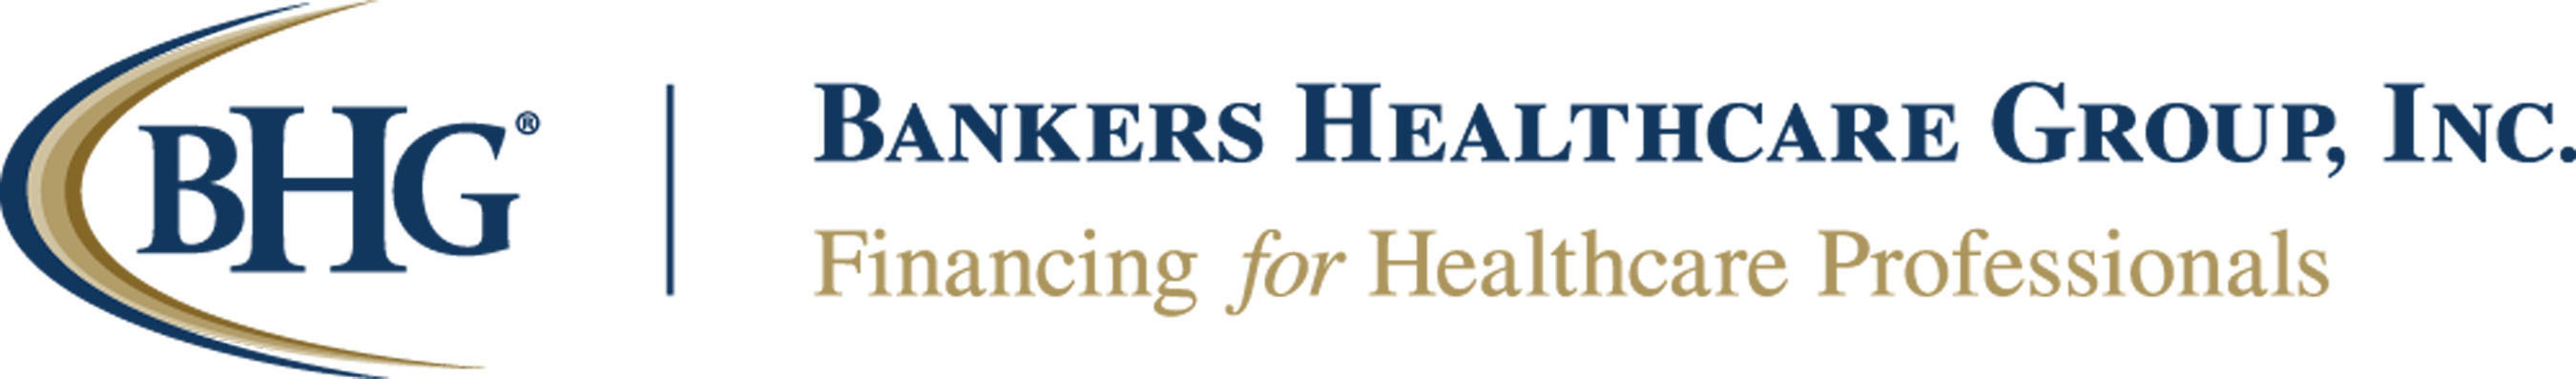 Bankers Healthcare Group, a leading provider of innovative financing solutions for healthcare professionals. (PRNewsFoto/Bankers Healthcare Group, Inc.) (PRNewsFoto/)